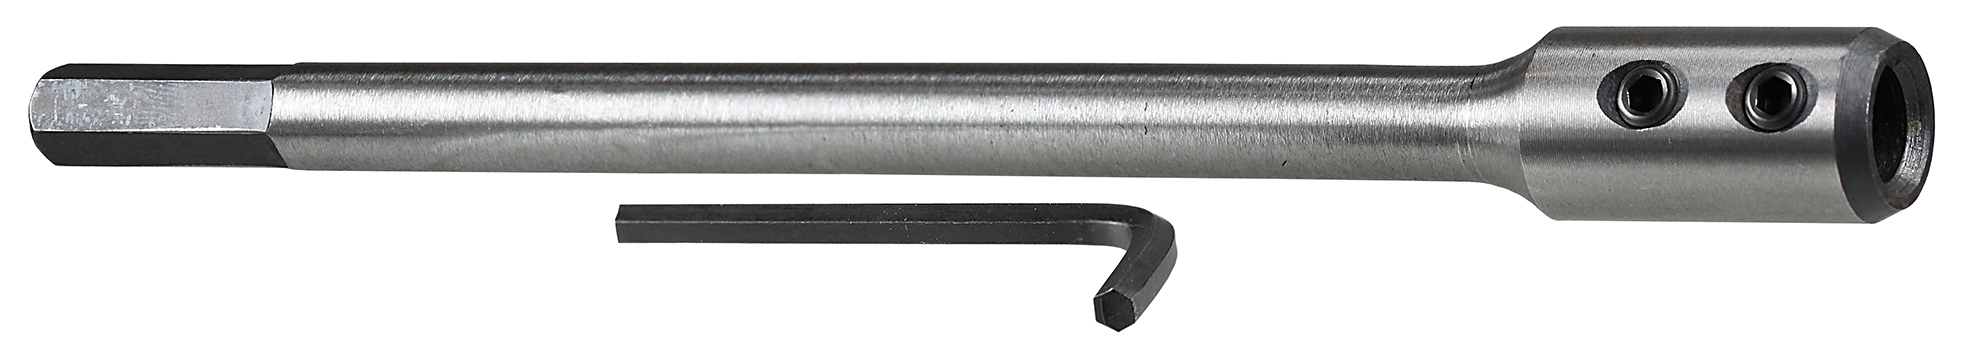 Extension, 7/16 in. Size, 9 in. length, Steel material